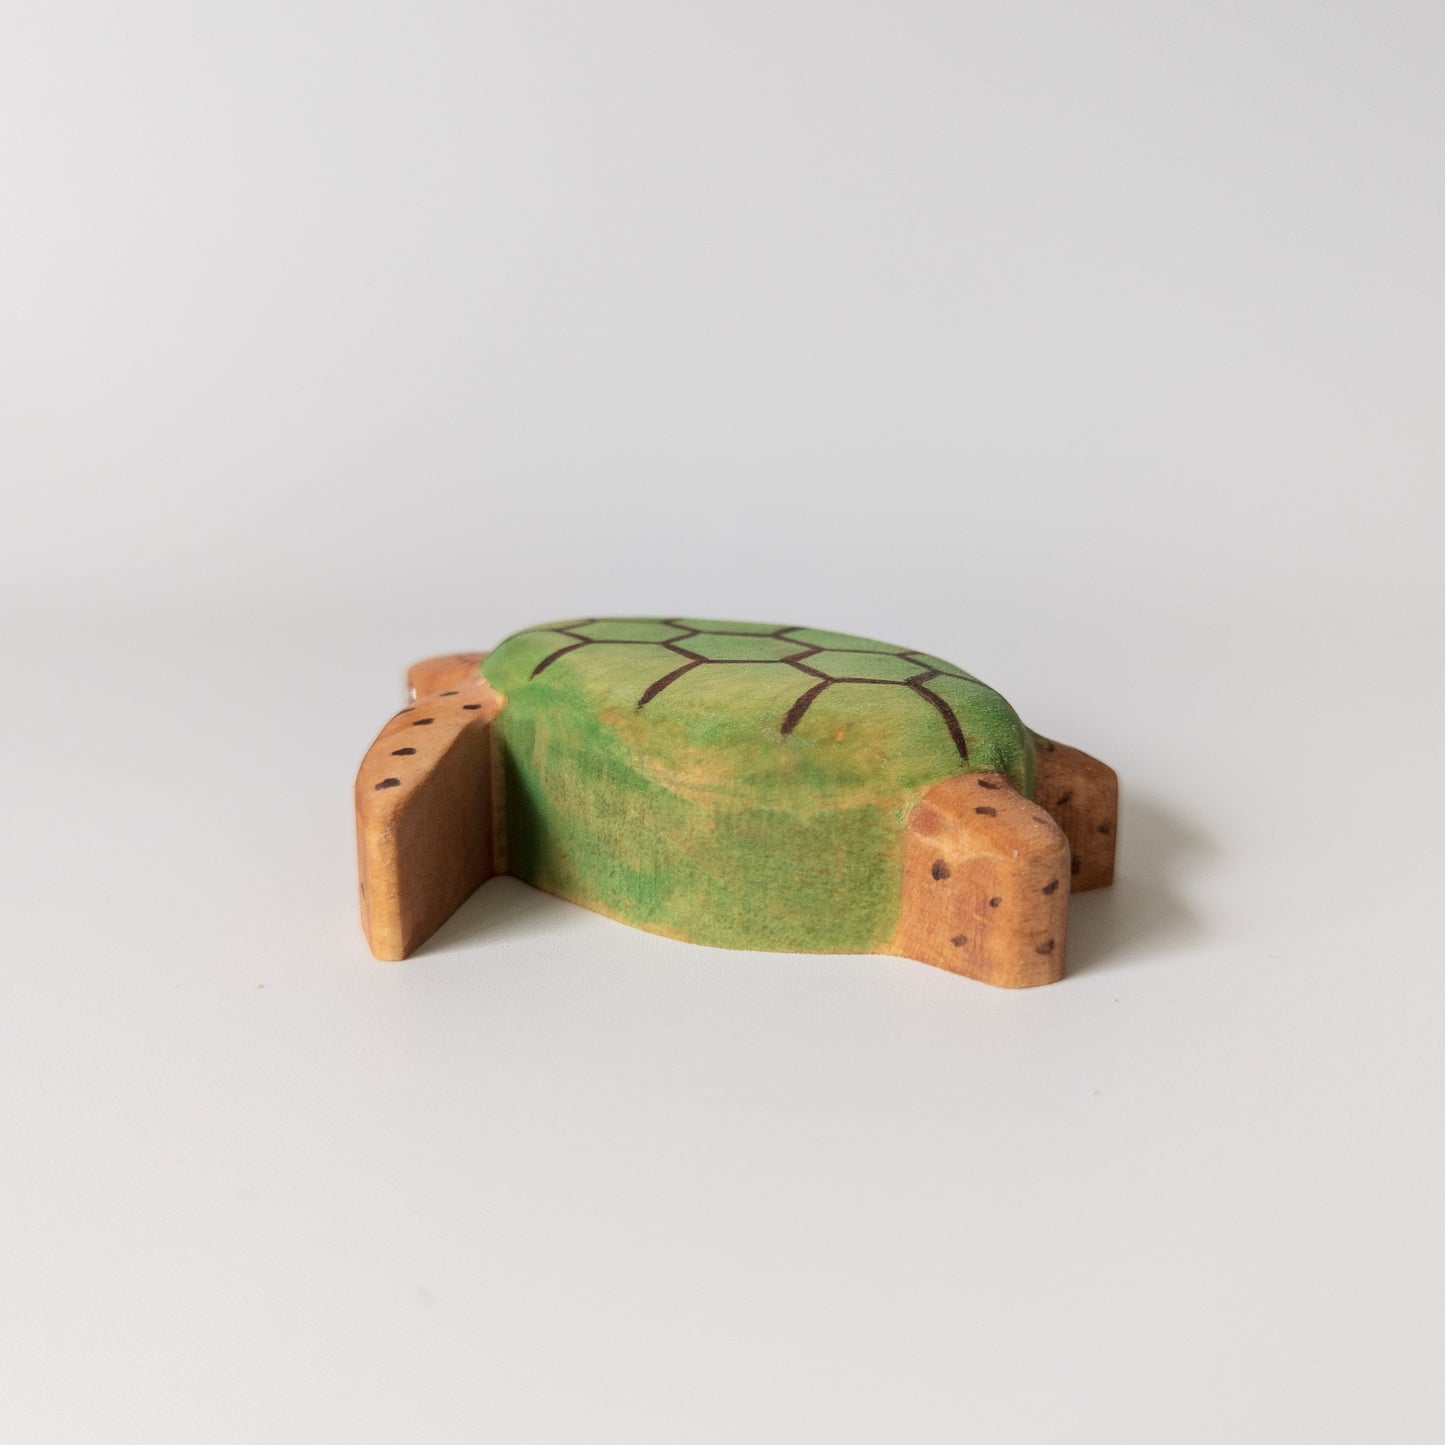 Sea Turtle Wooden Toy